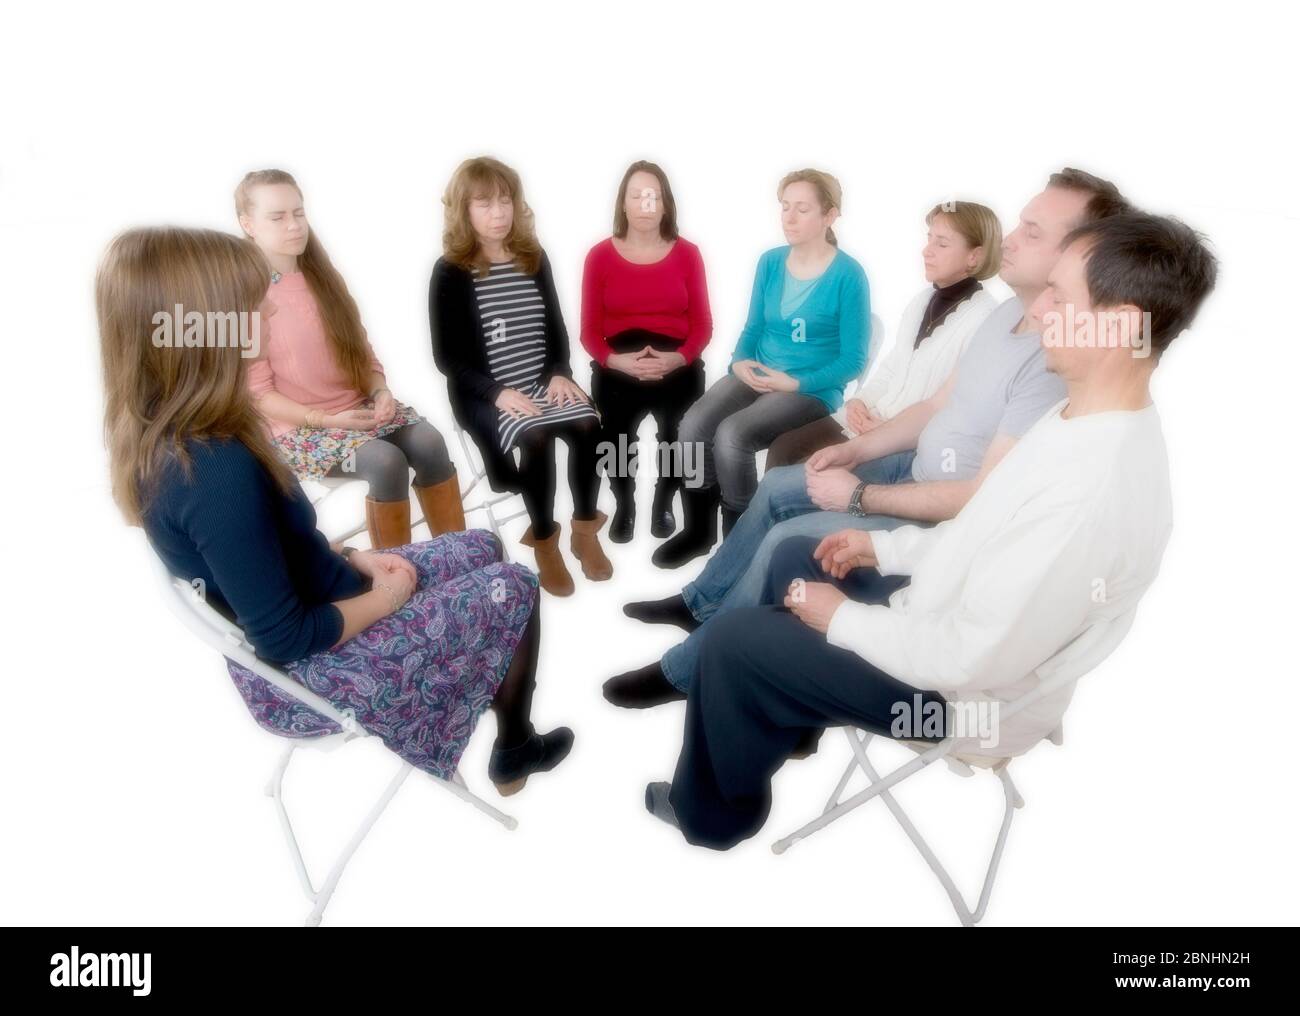 A calming and therapeutic group meditation session in England. Stock Photo